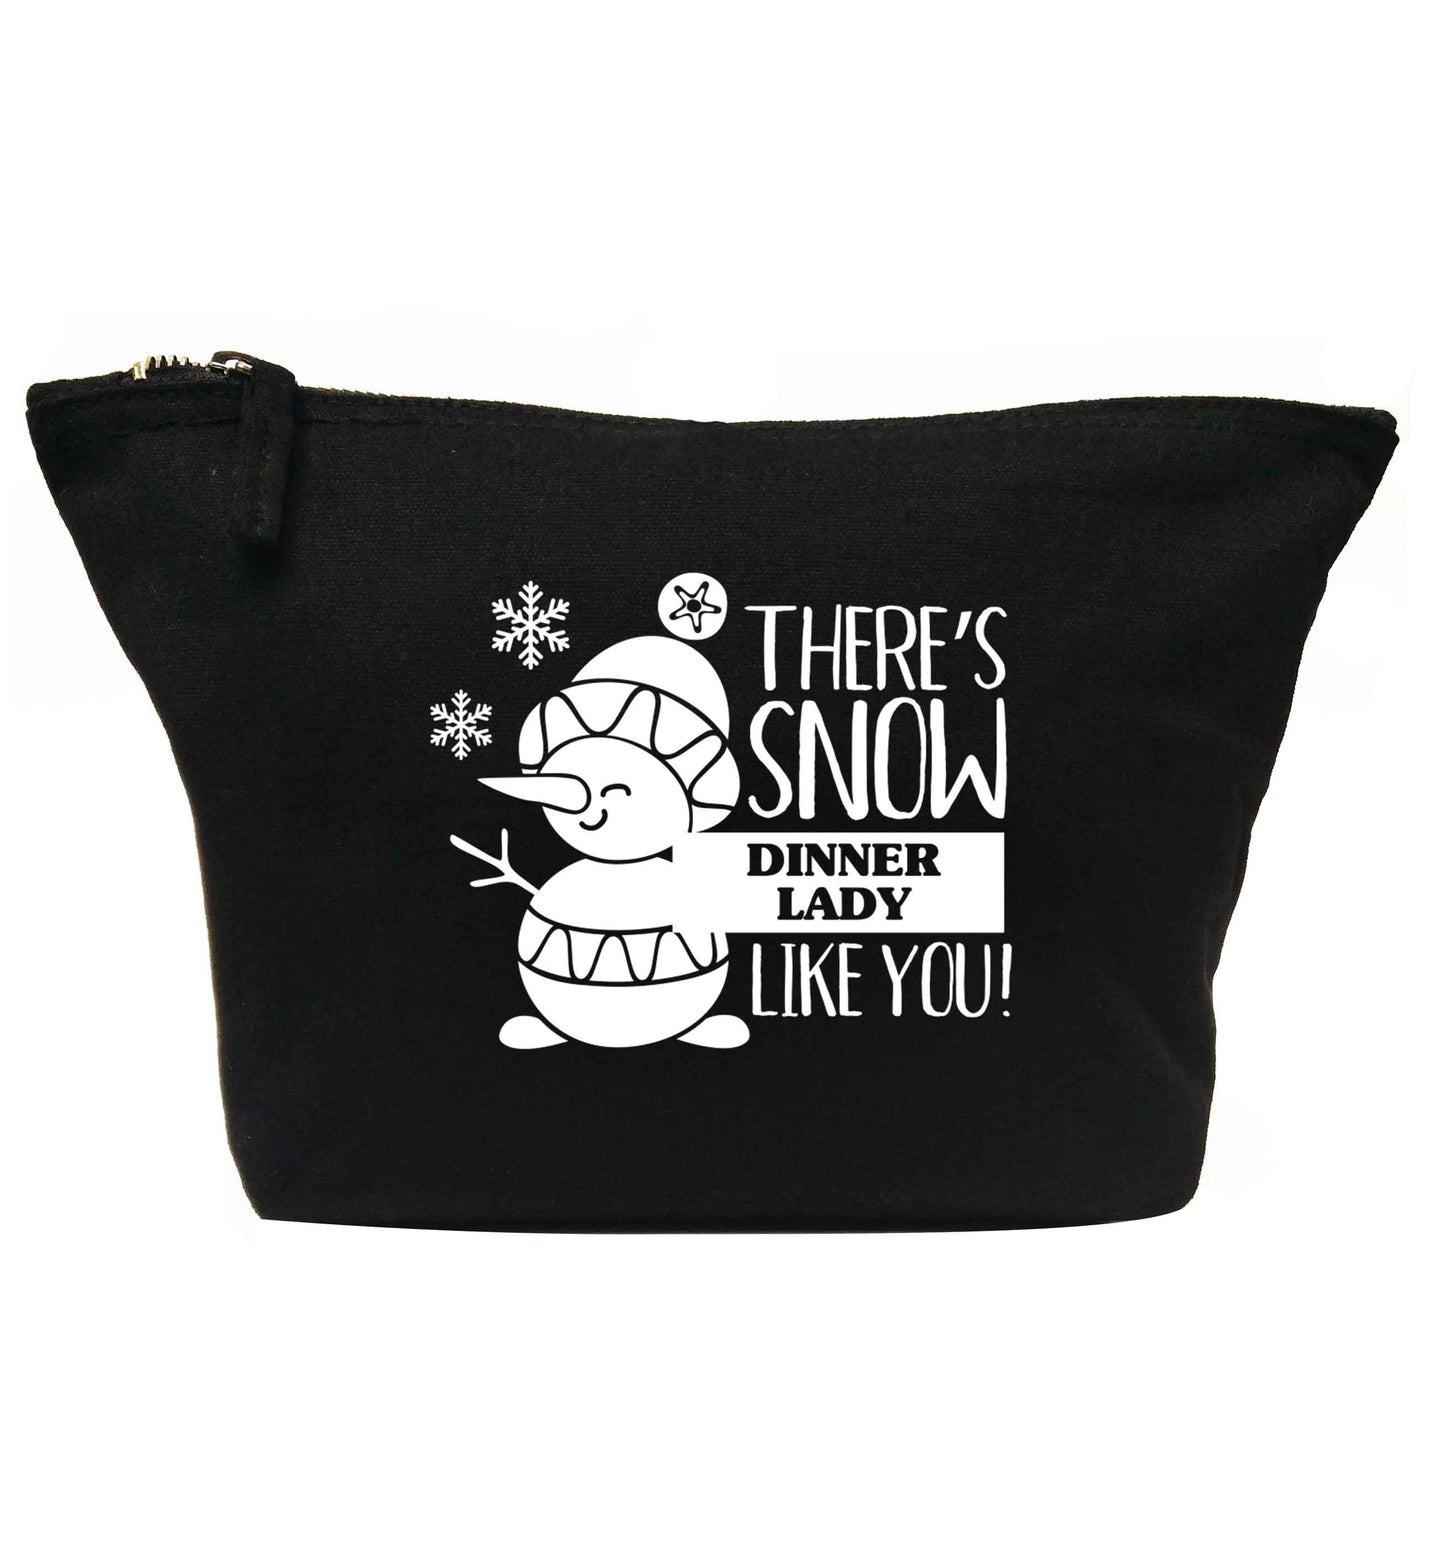 There's snow dinner lady like you | Makeup / wash bag